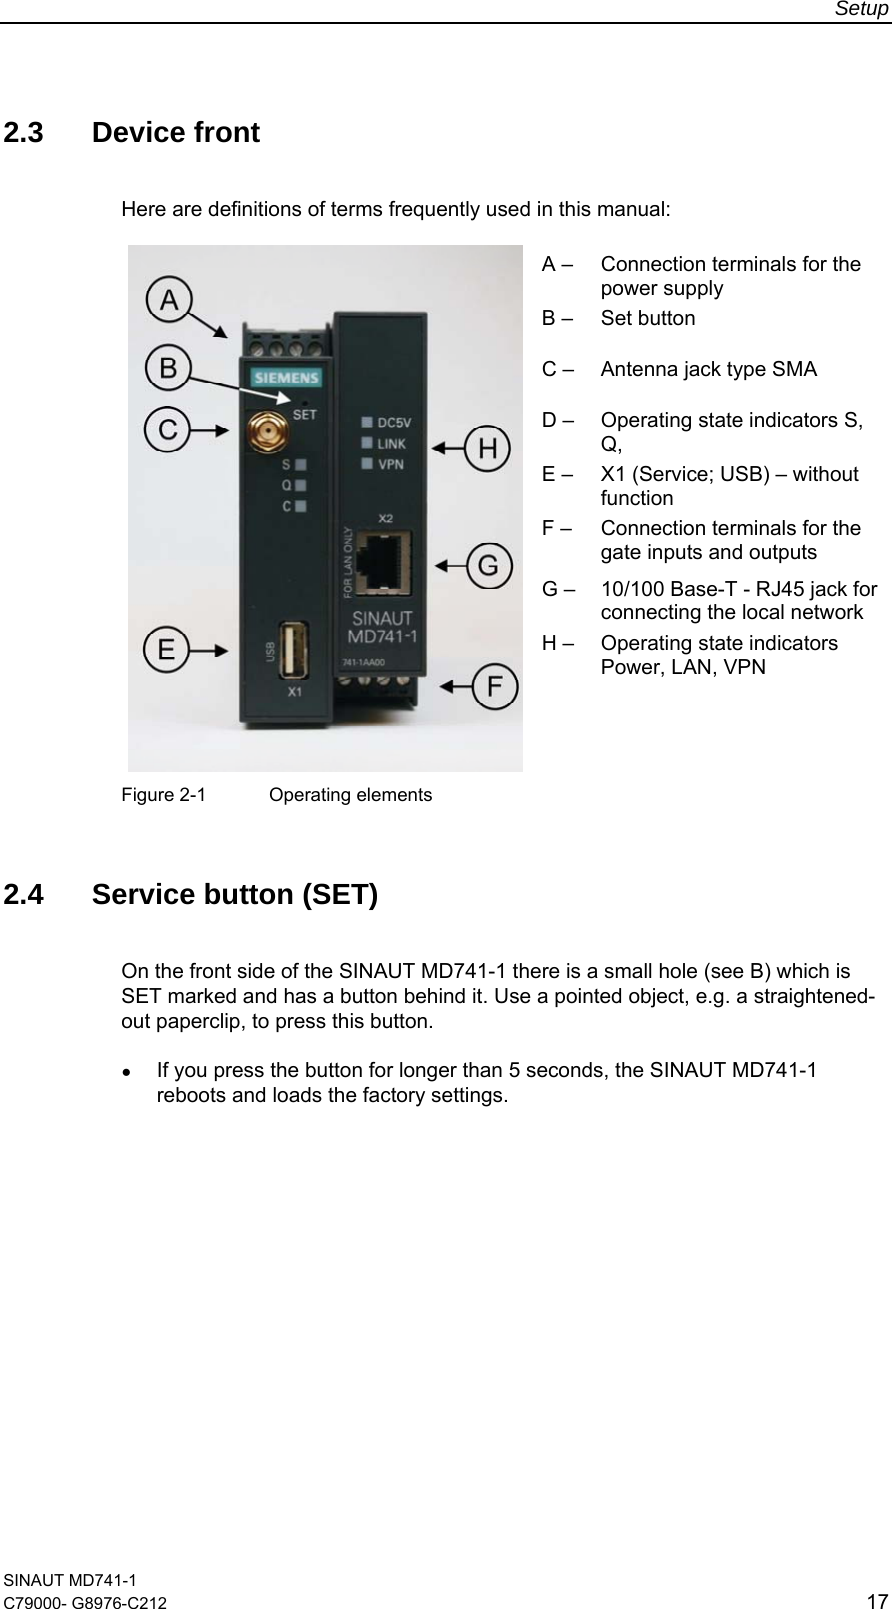 Setup  SINAUT MD741-1 C79000- G8976-C212  17  2.3 Device front Here are definitions of terms frequently used in this manual:  A –  Connection terminals for the power supply B –  Set button C –  Antenna jack type SMA D –  Operating state indicators S, Q,  E –  X1 (Service; USB) – without function F –   Connection terminals for the gate inputs and outputs G –  10/100 Base-T - RJ45 jack for connecting the local network   H –  Operating state indicators Power, LAN, VPN  Figure 2-1  Operating elements   2.4 Service button (SET) On the front side of the SINAUT MD741-1 there is a small hole (see B) which is SET marked and has a button behind it. Use a pointed object, e.g. a straightened-out paperclip, to press this button. ● If you press the button for longer than 5 seconds, the SINAUT MD741-1 reboots and loads the factory settings.  